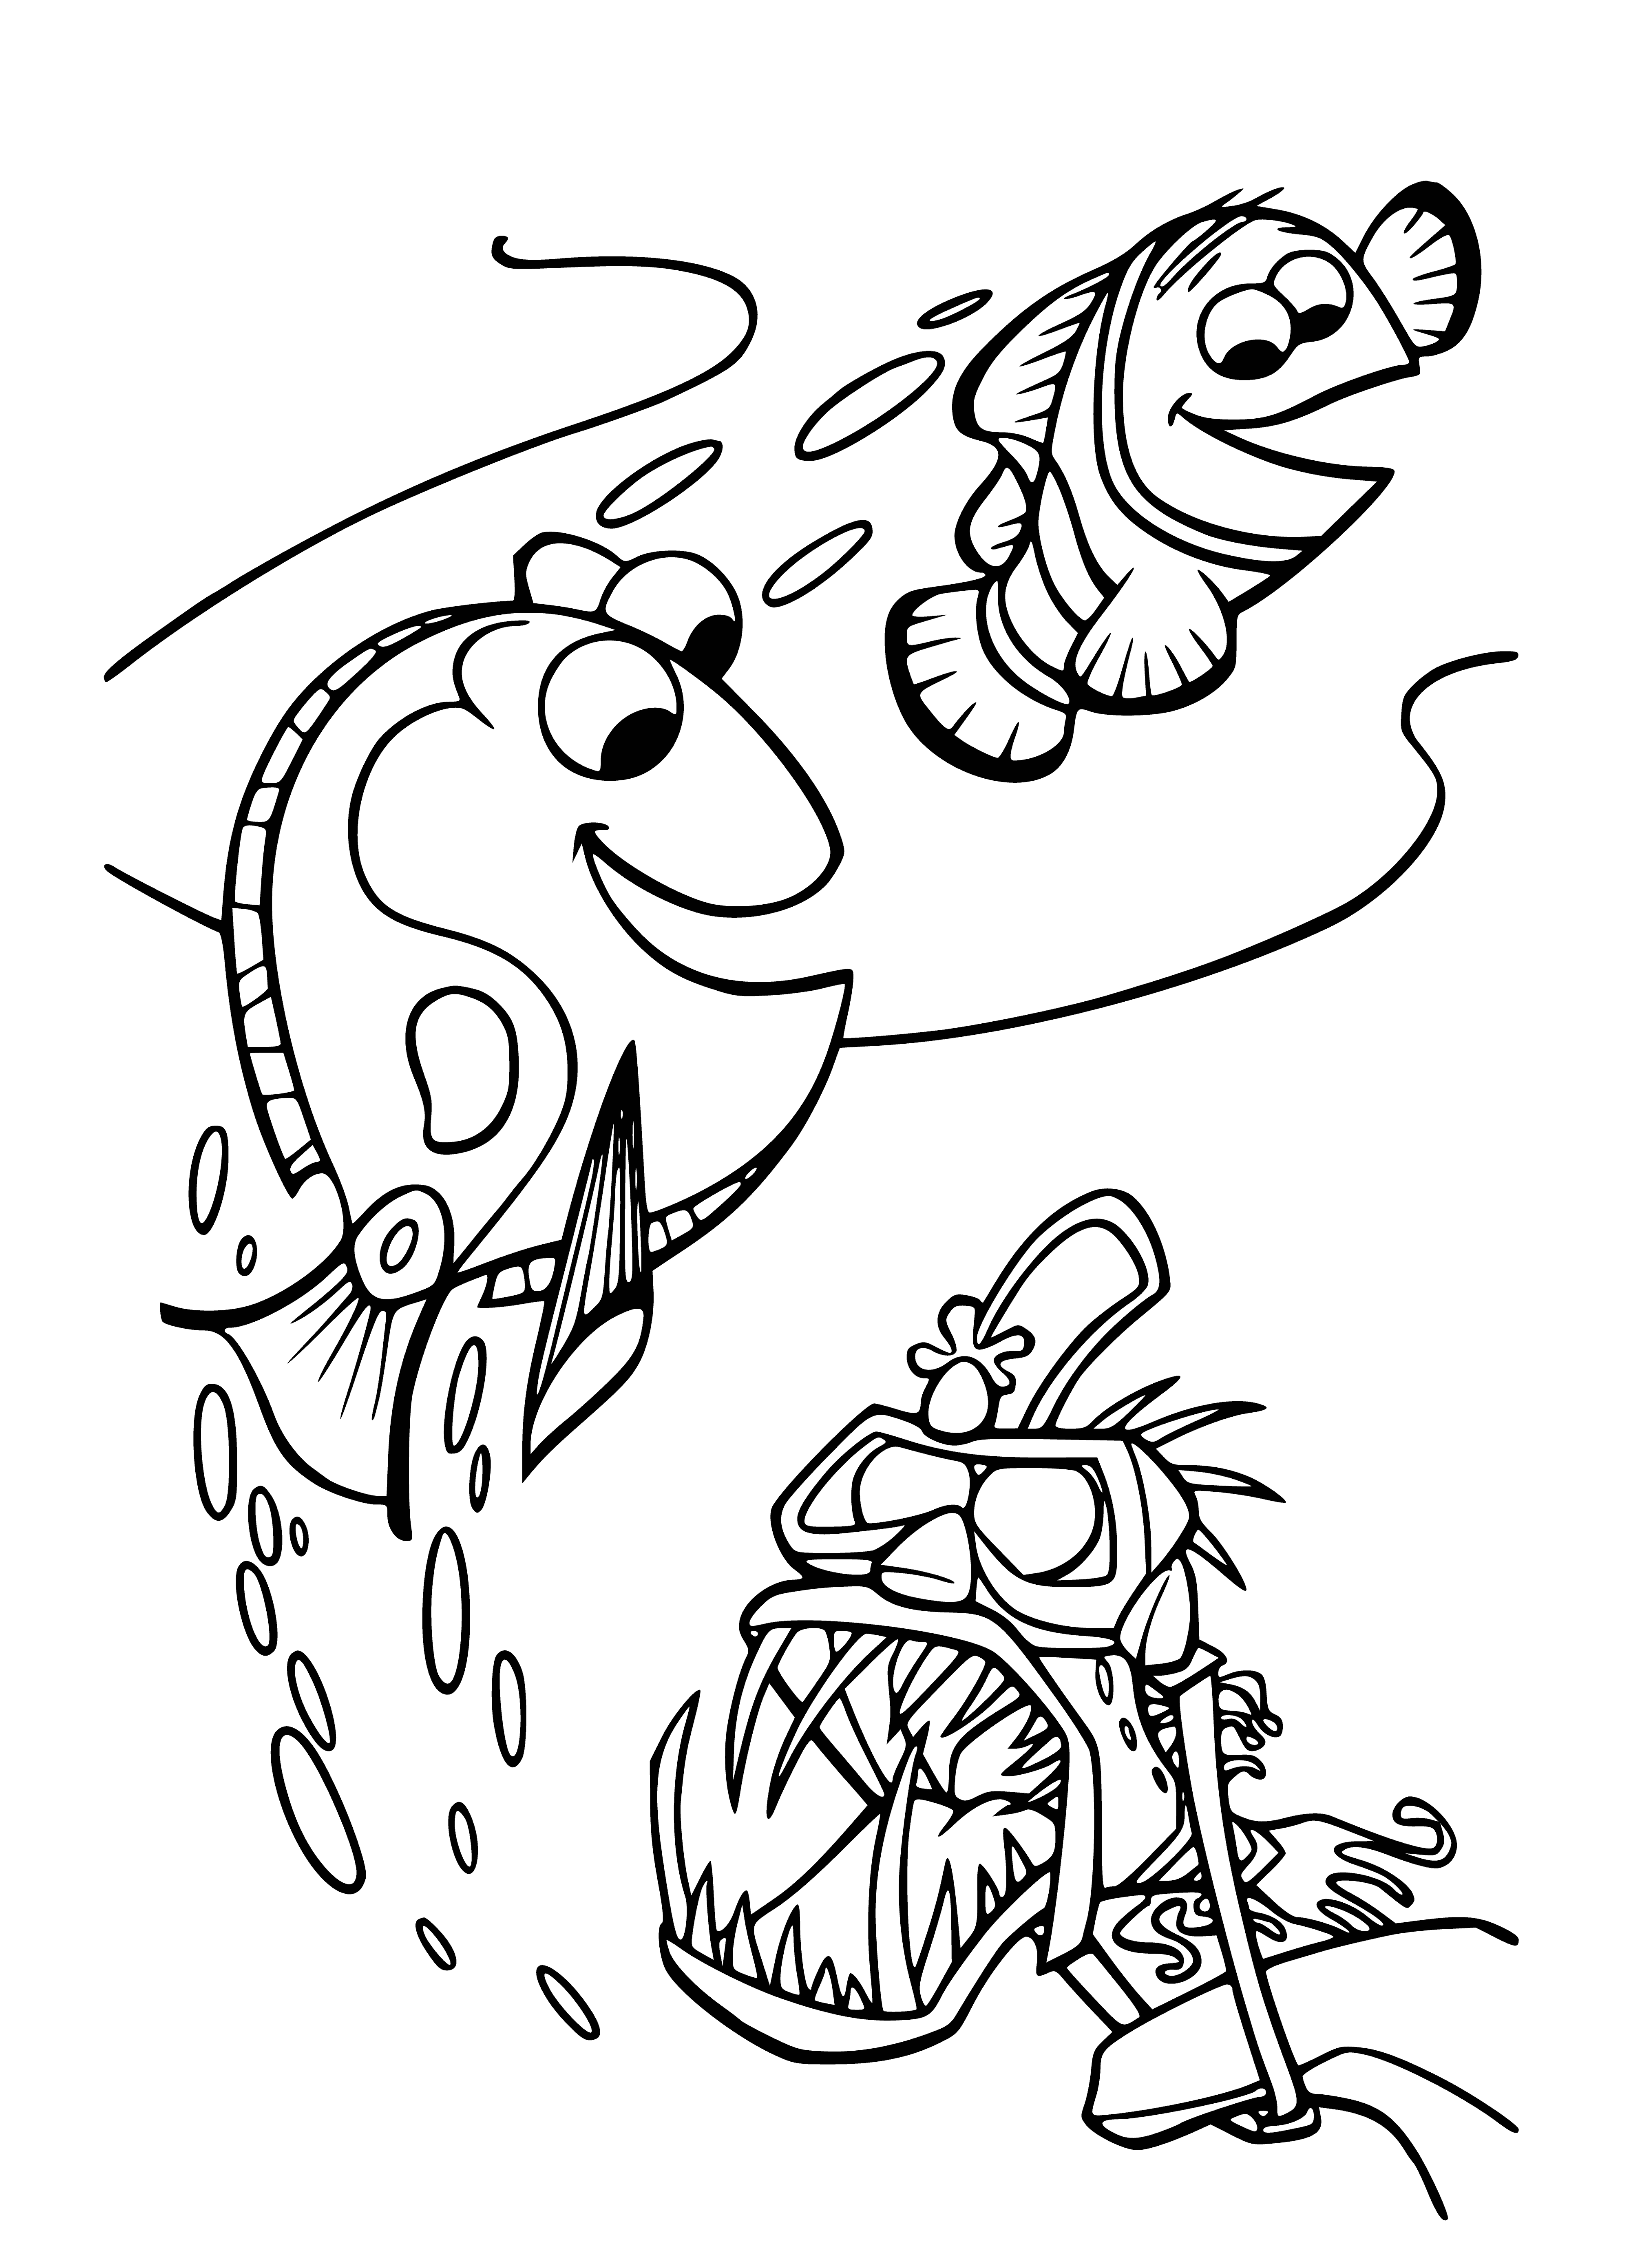 coloring page: Marlin embarks on a treacherous quest to find Nemo, who's been snatched by a diver and stuck in a tank. After much danger, father and son reunite and Nemo is free.